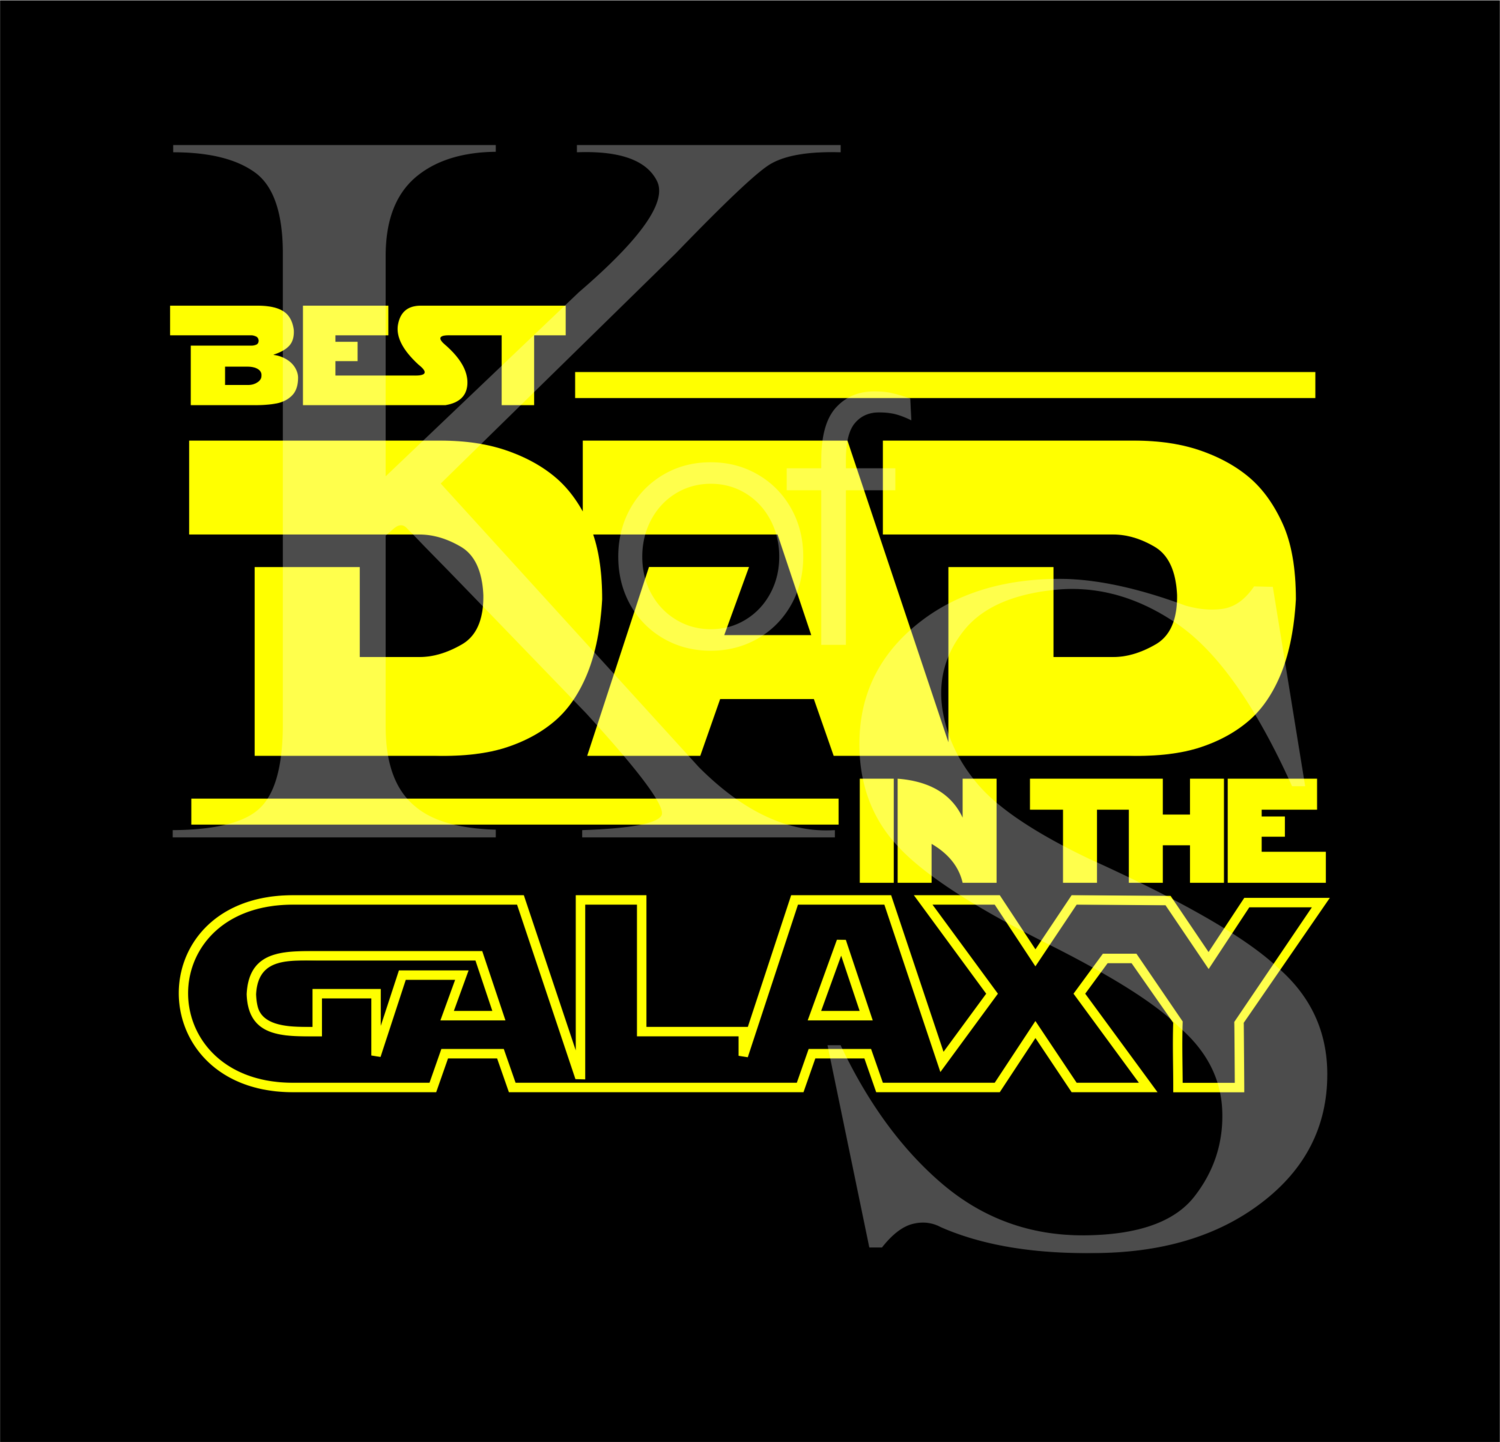 Best Dad in the Galaxy SVG, Fathers Day SVG, Best Dad Svg, Adult Humor Svg, Fathers Day 2020 SVG, Best Dad Svg, Fathers Day Shirt Svg, Dxf